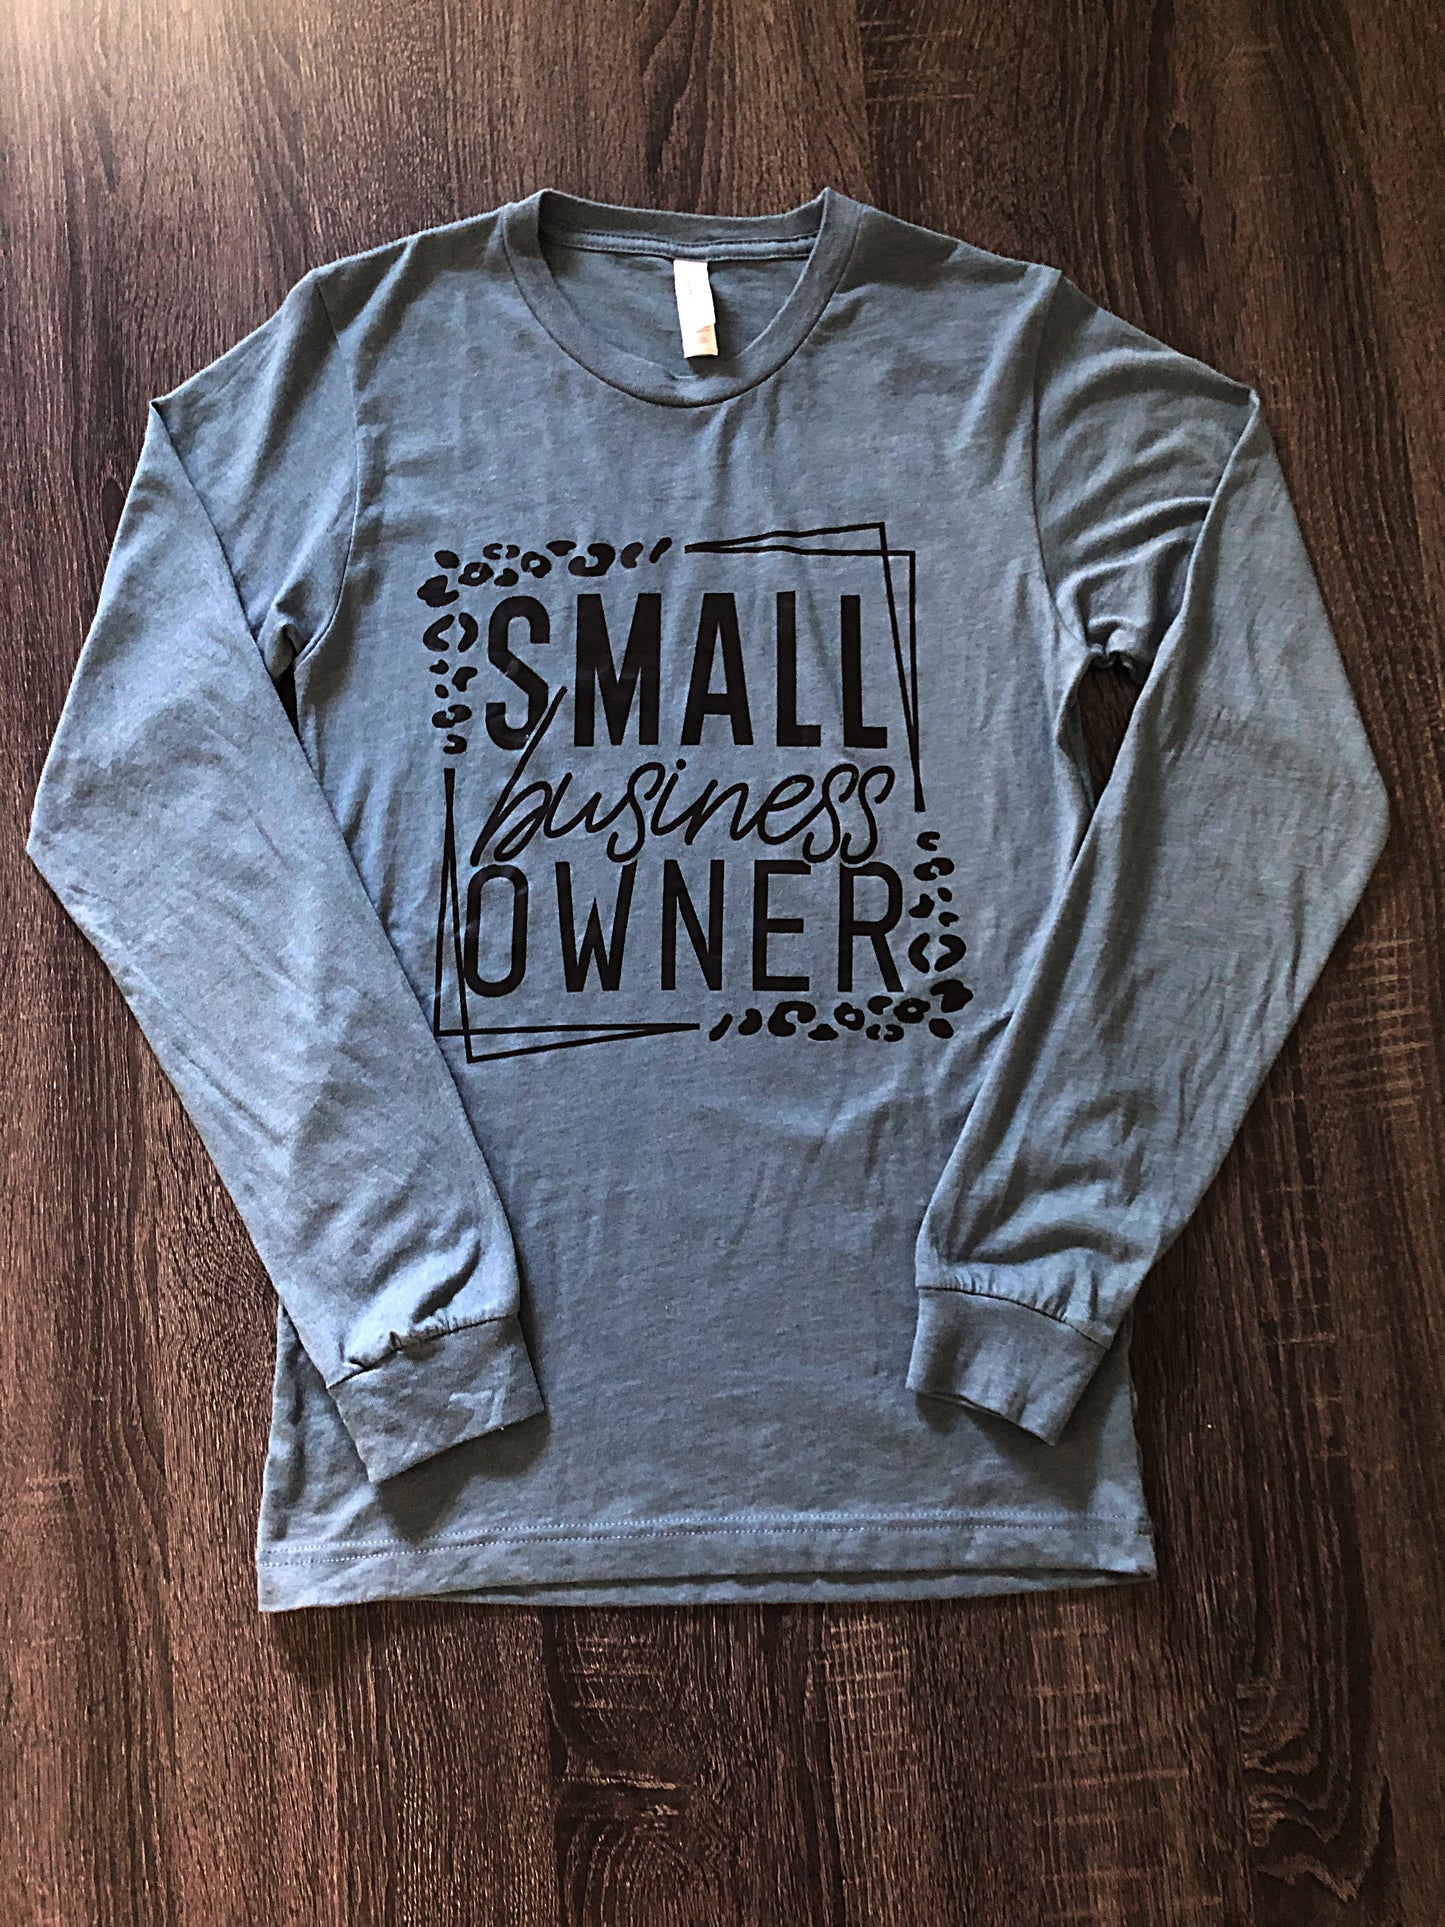 Small Busines Owner Long Sleeve Top